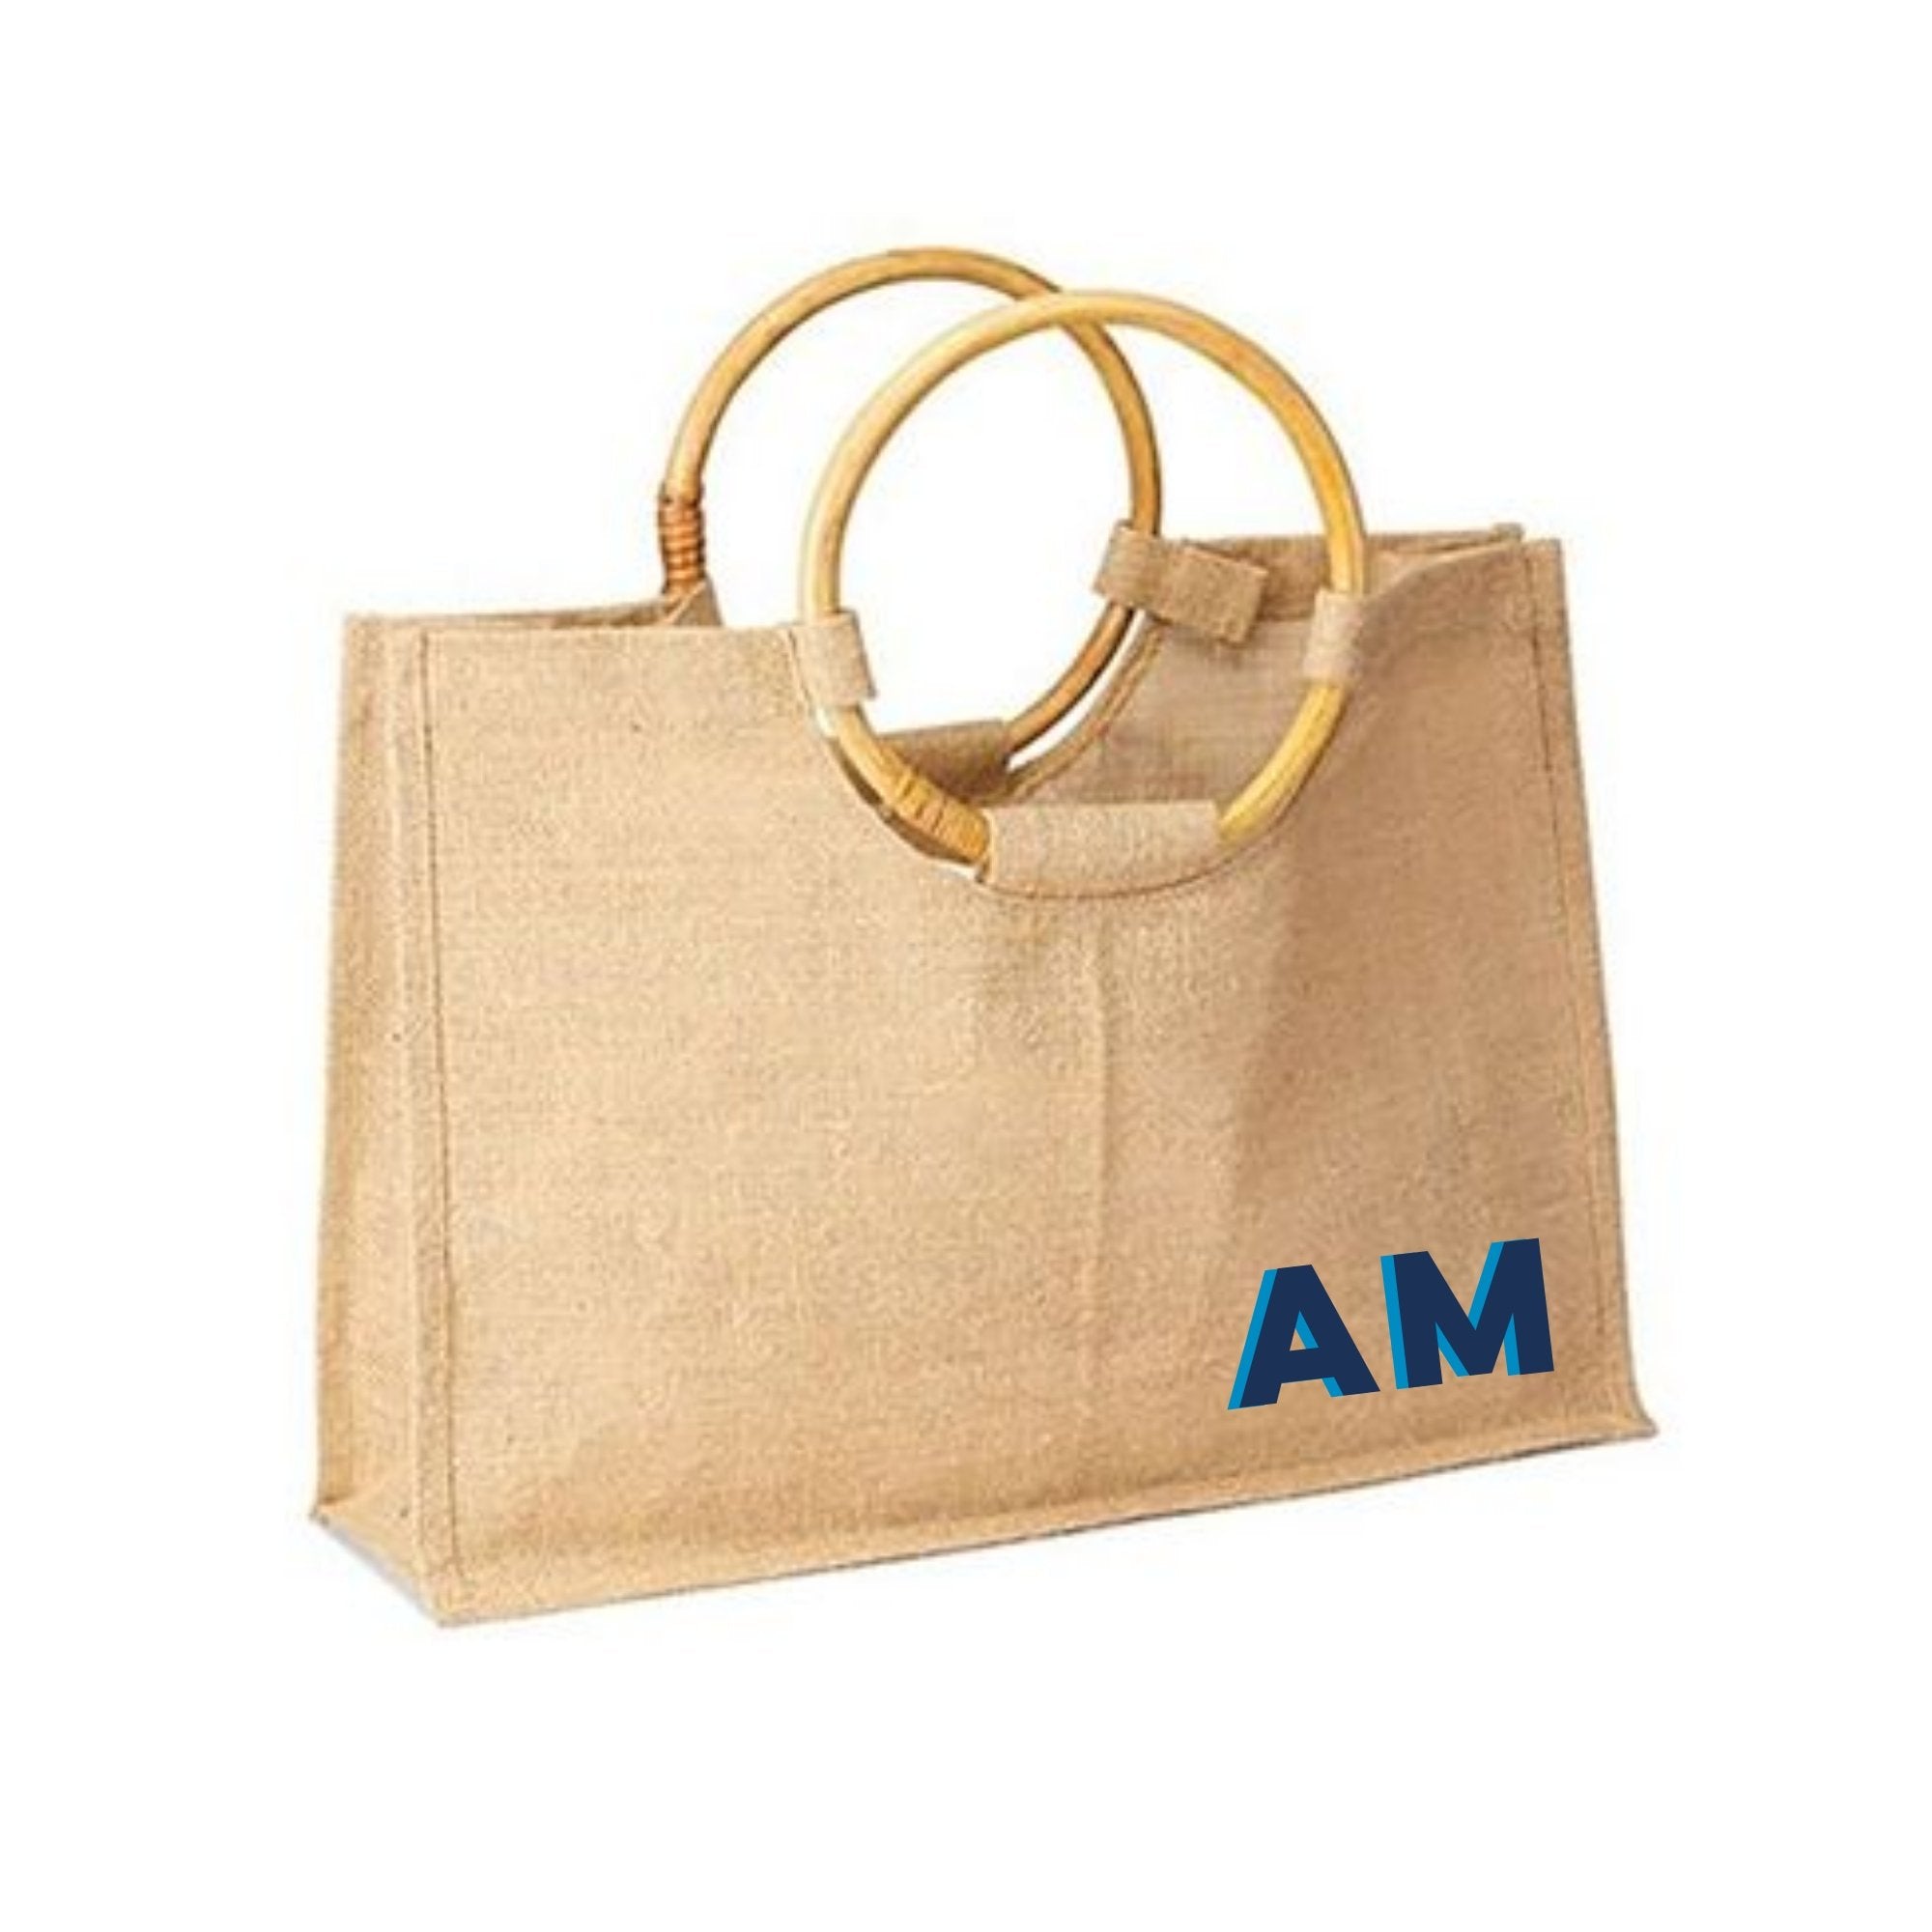 Monogrammed Canvas Tote Bag - 5 colors – Pretty Personal Gifts